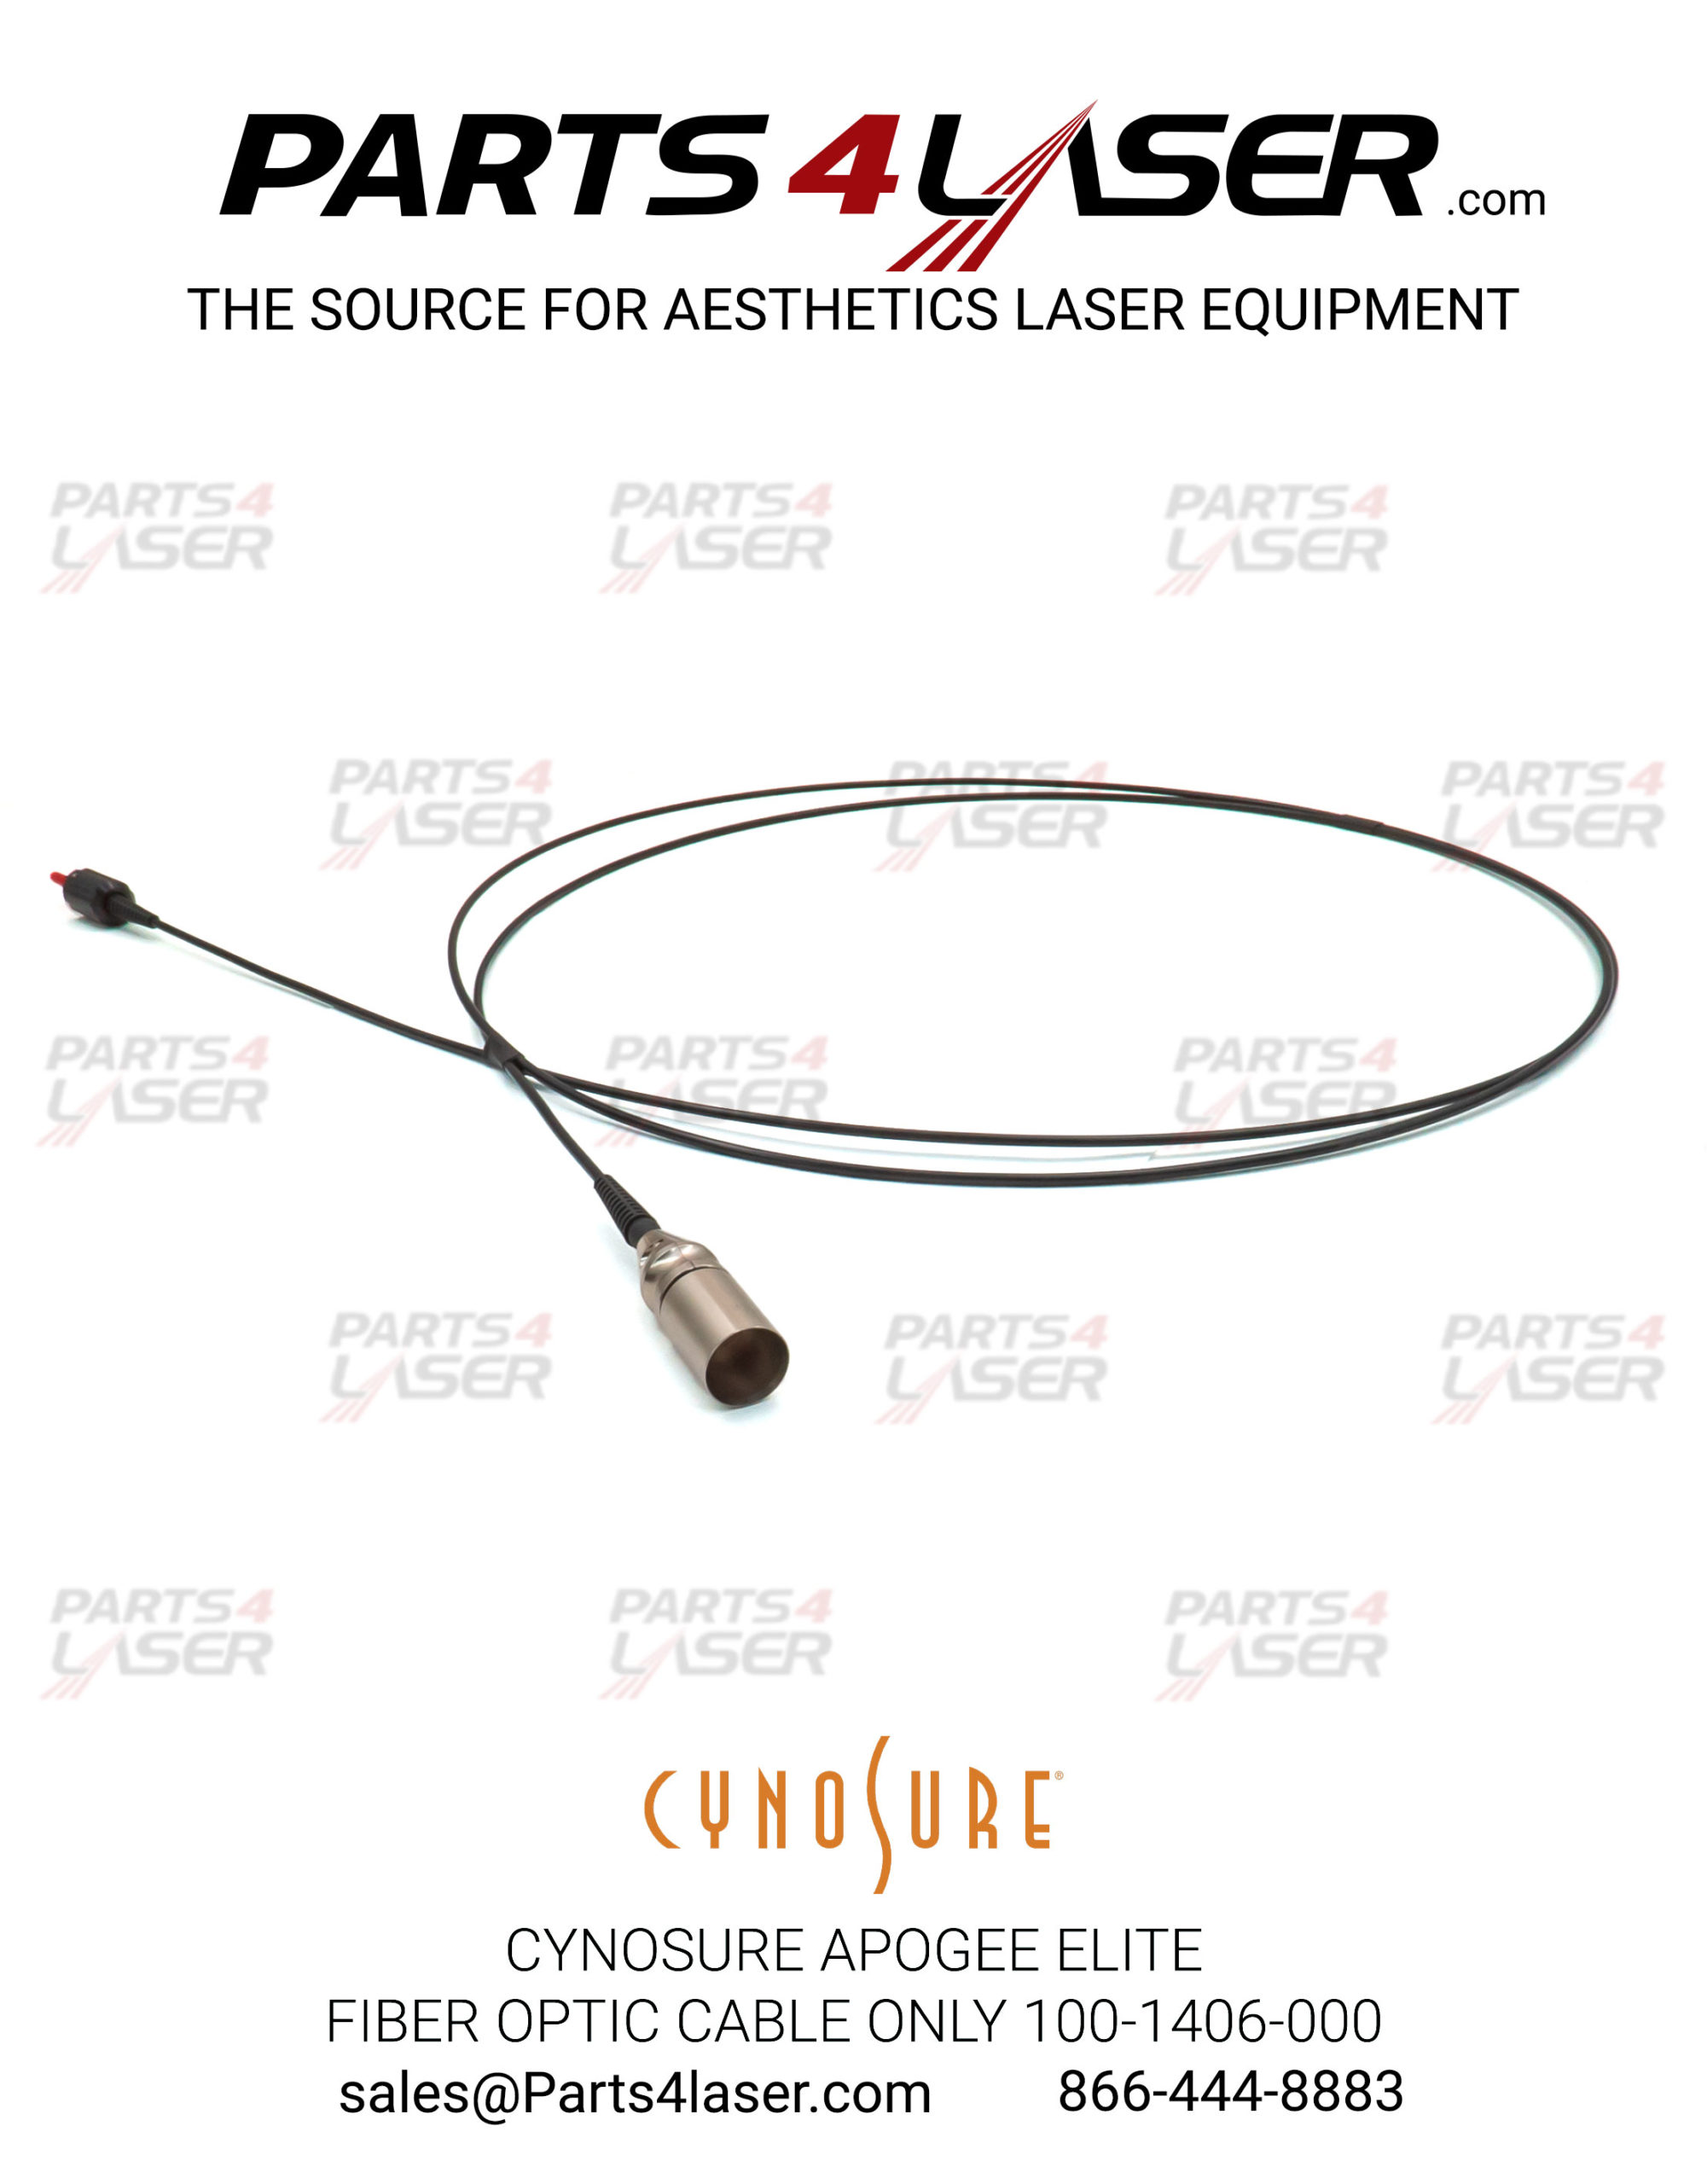 CYNOSURE APOGEE ELITE FIBER OPTIC CABLE ONLY 100-1406-000, BLACK 